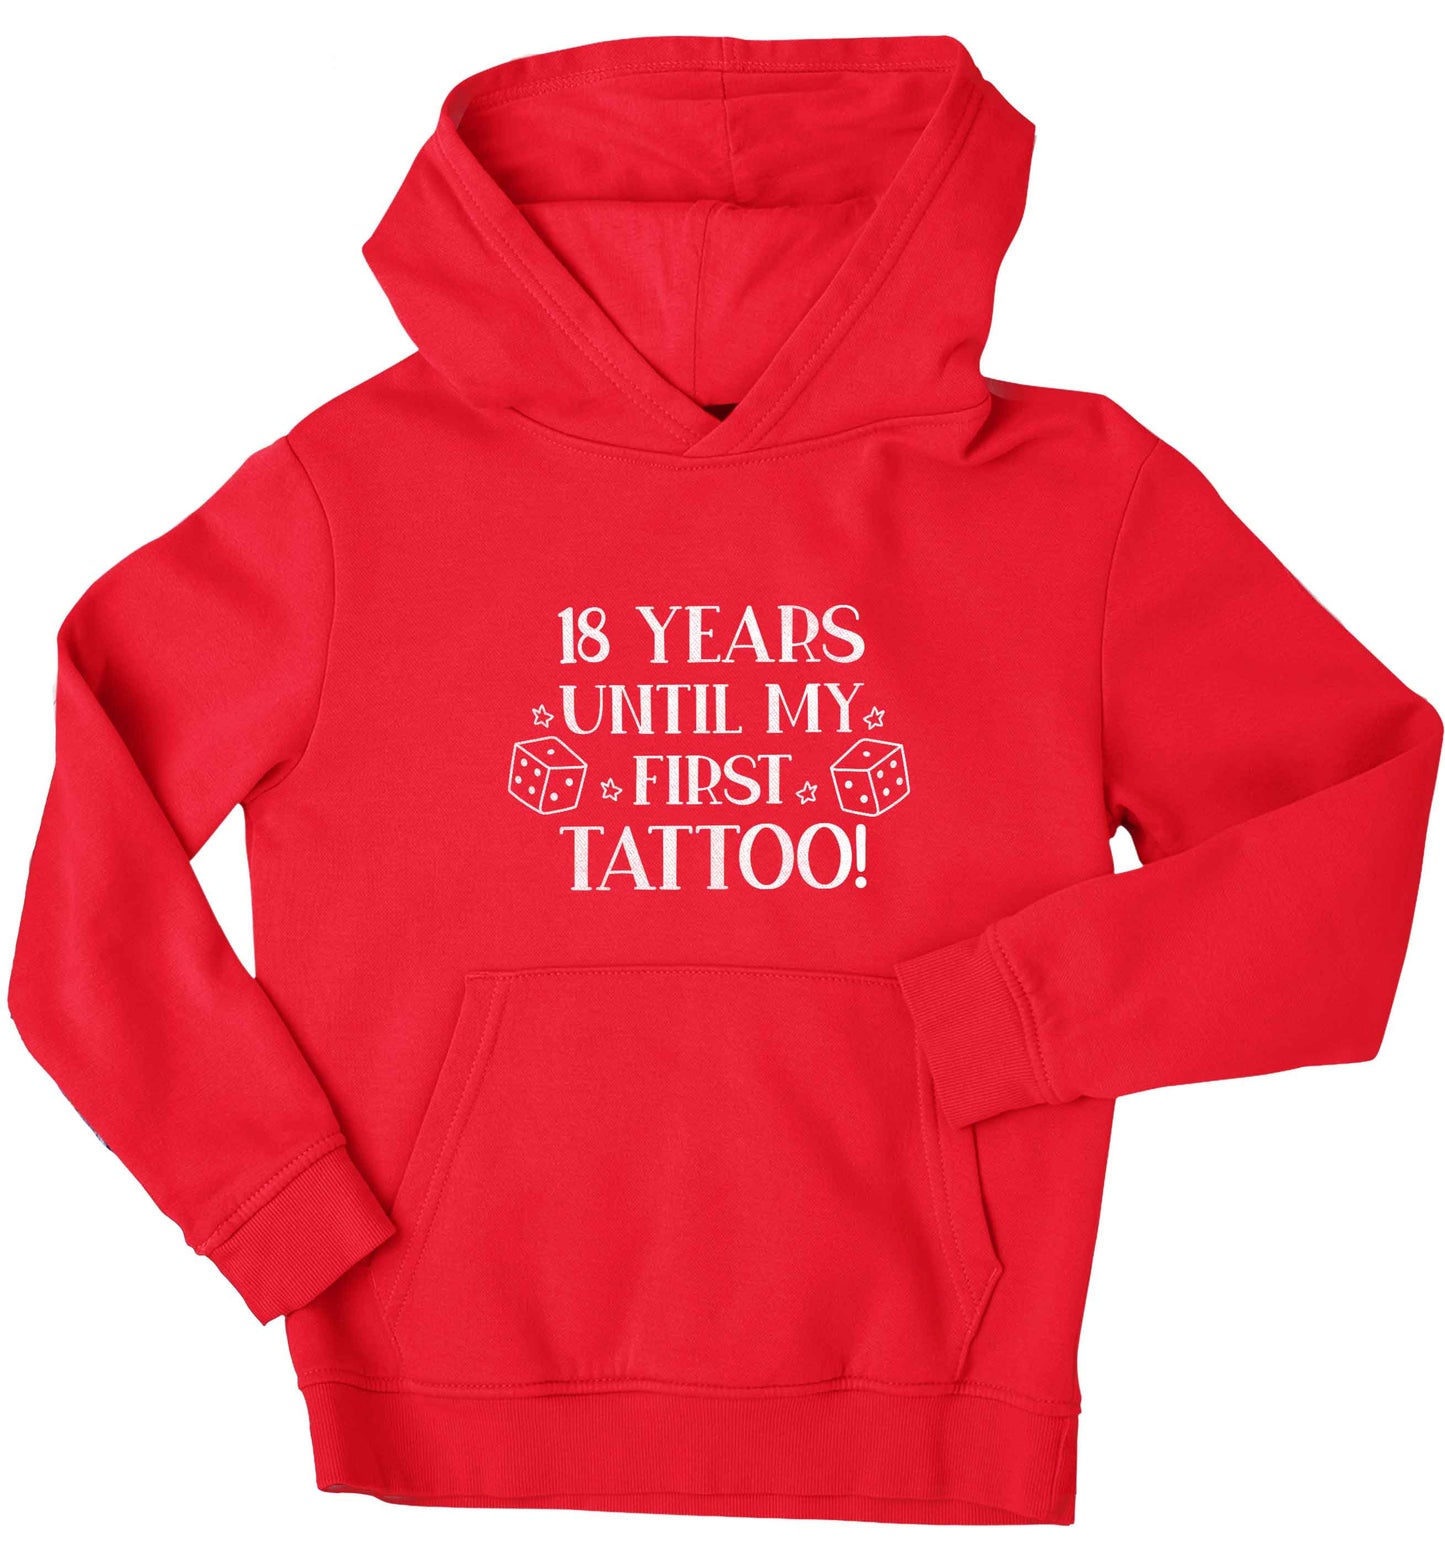 18 Years Until my First Tattoo children's red hoodie 12-13 Years